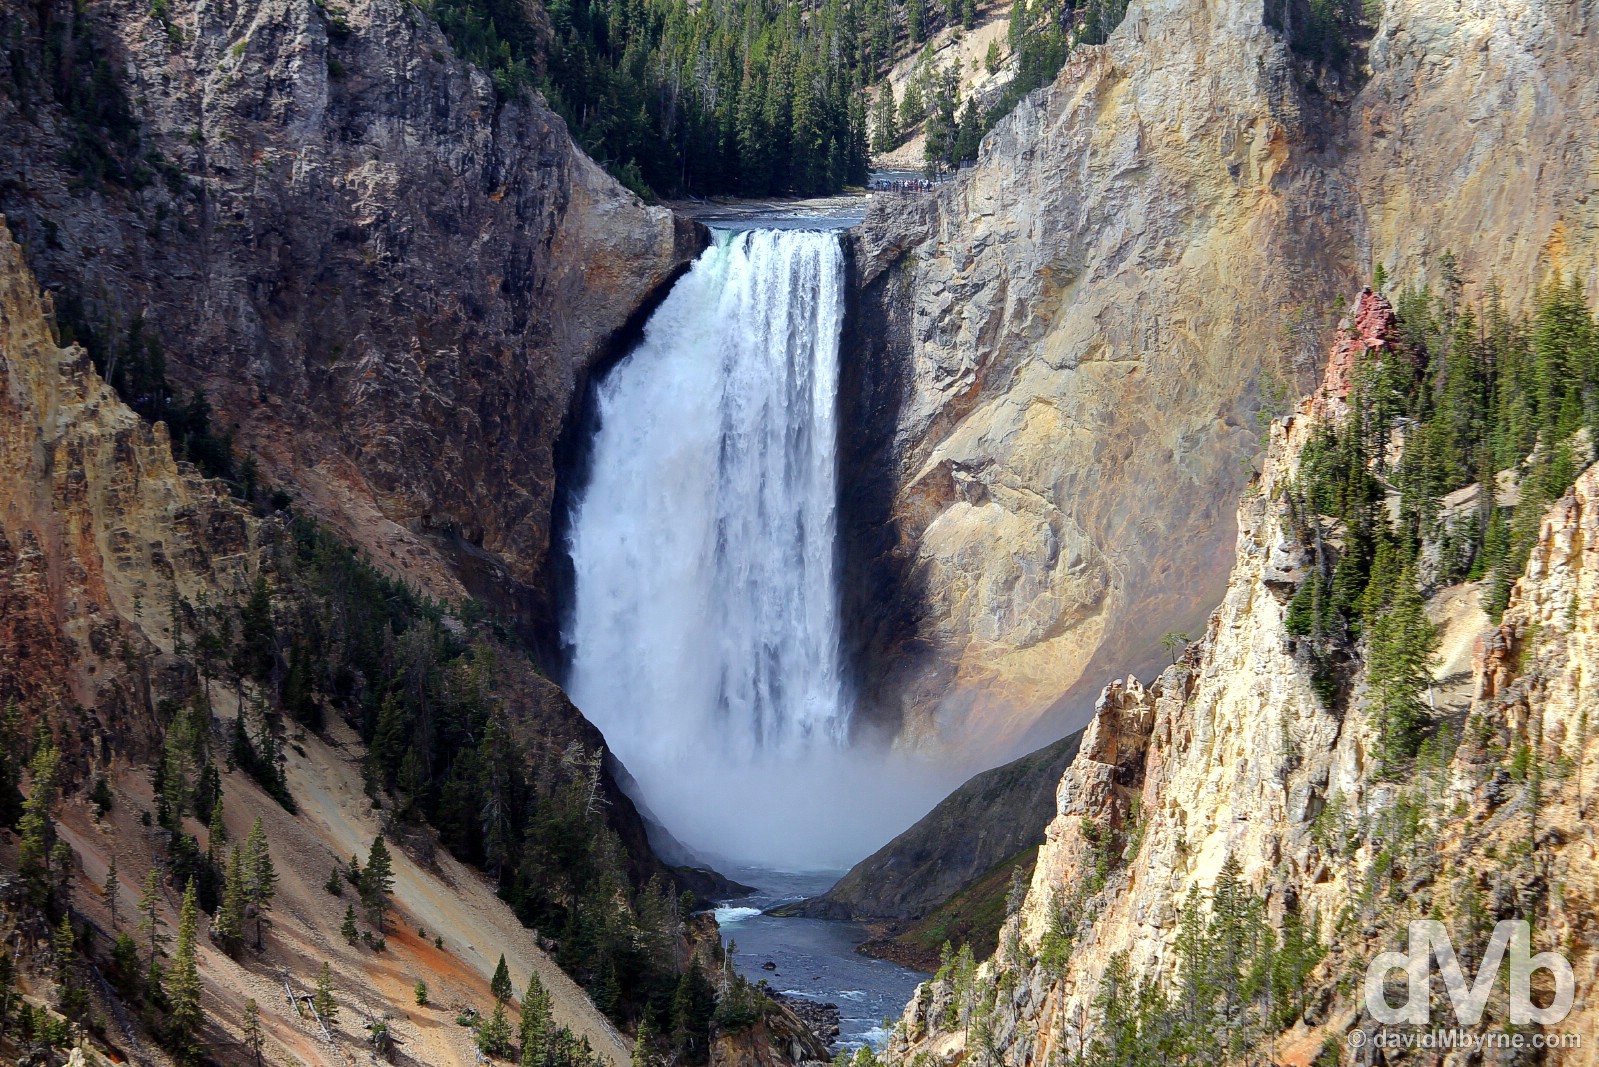 Lower Falls of the Grand Canyon of the Yellowstone River, Yellowstone National Park, Wyoming, USA. September 5, 2016.